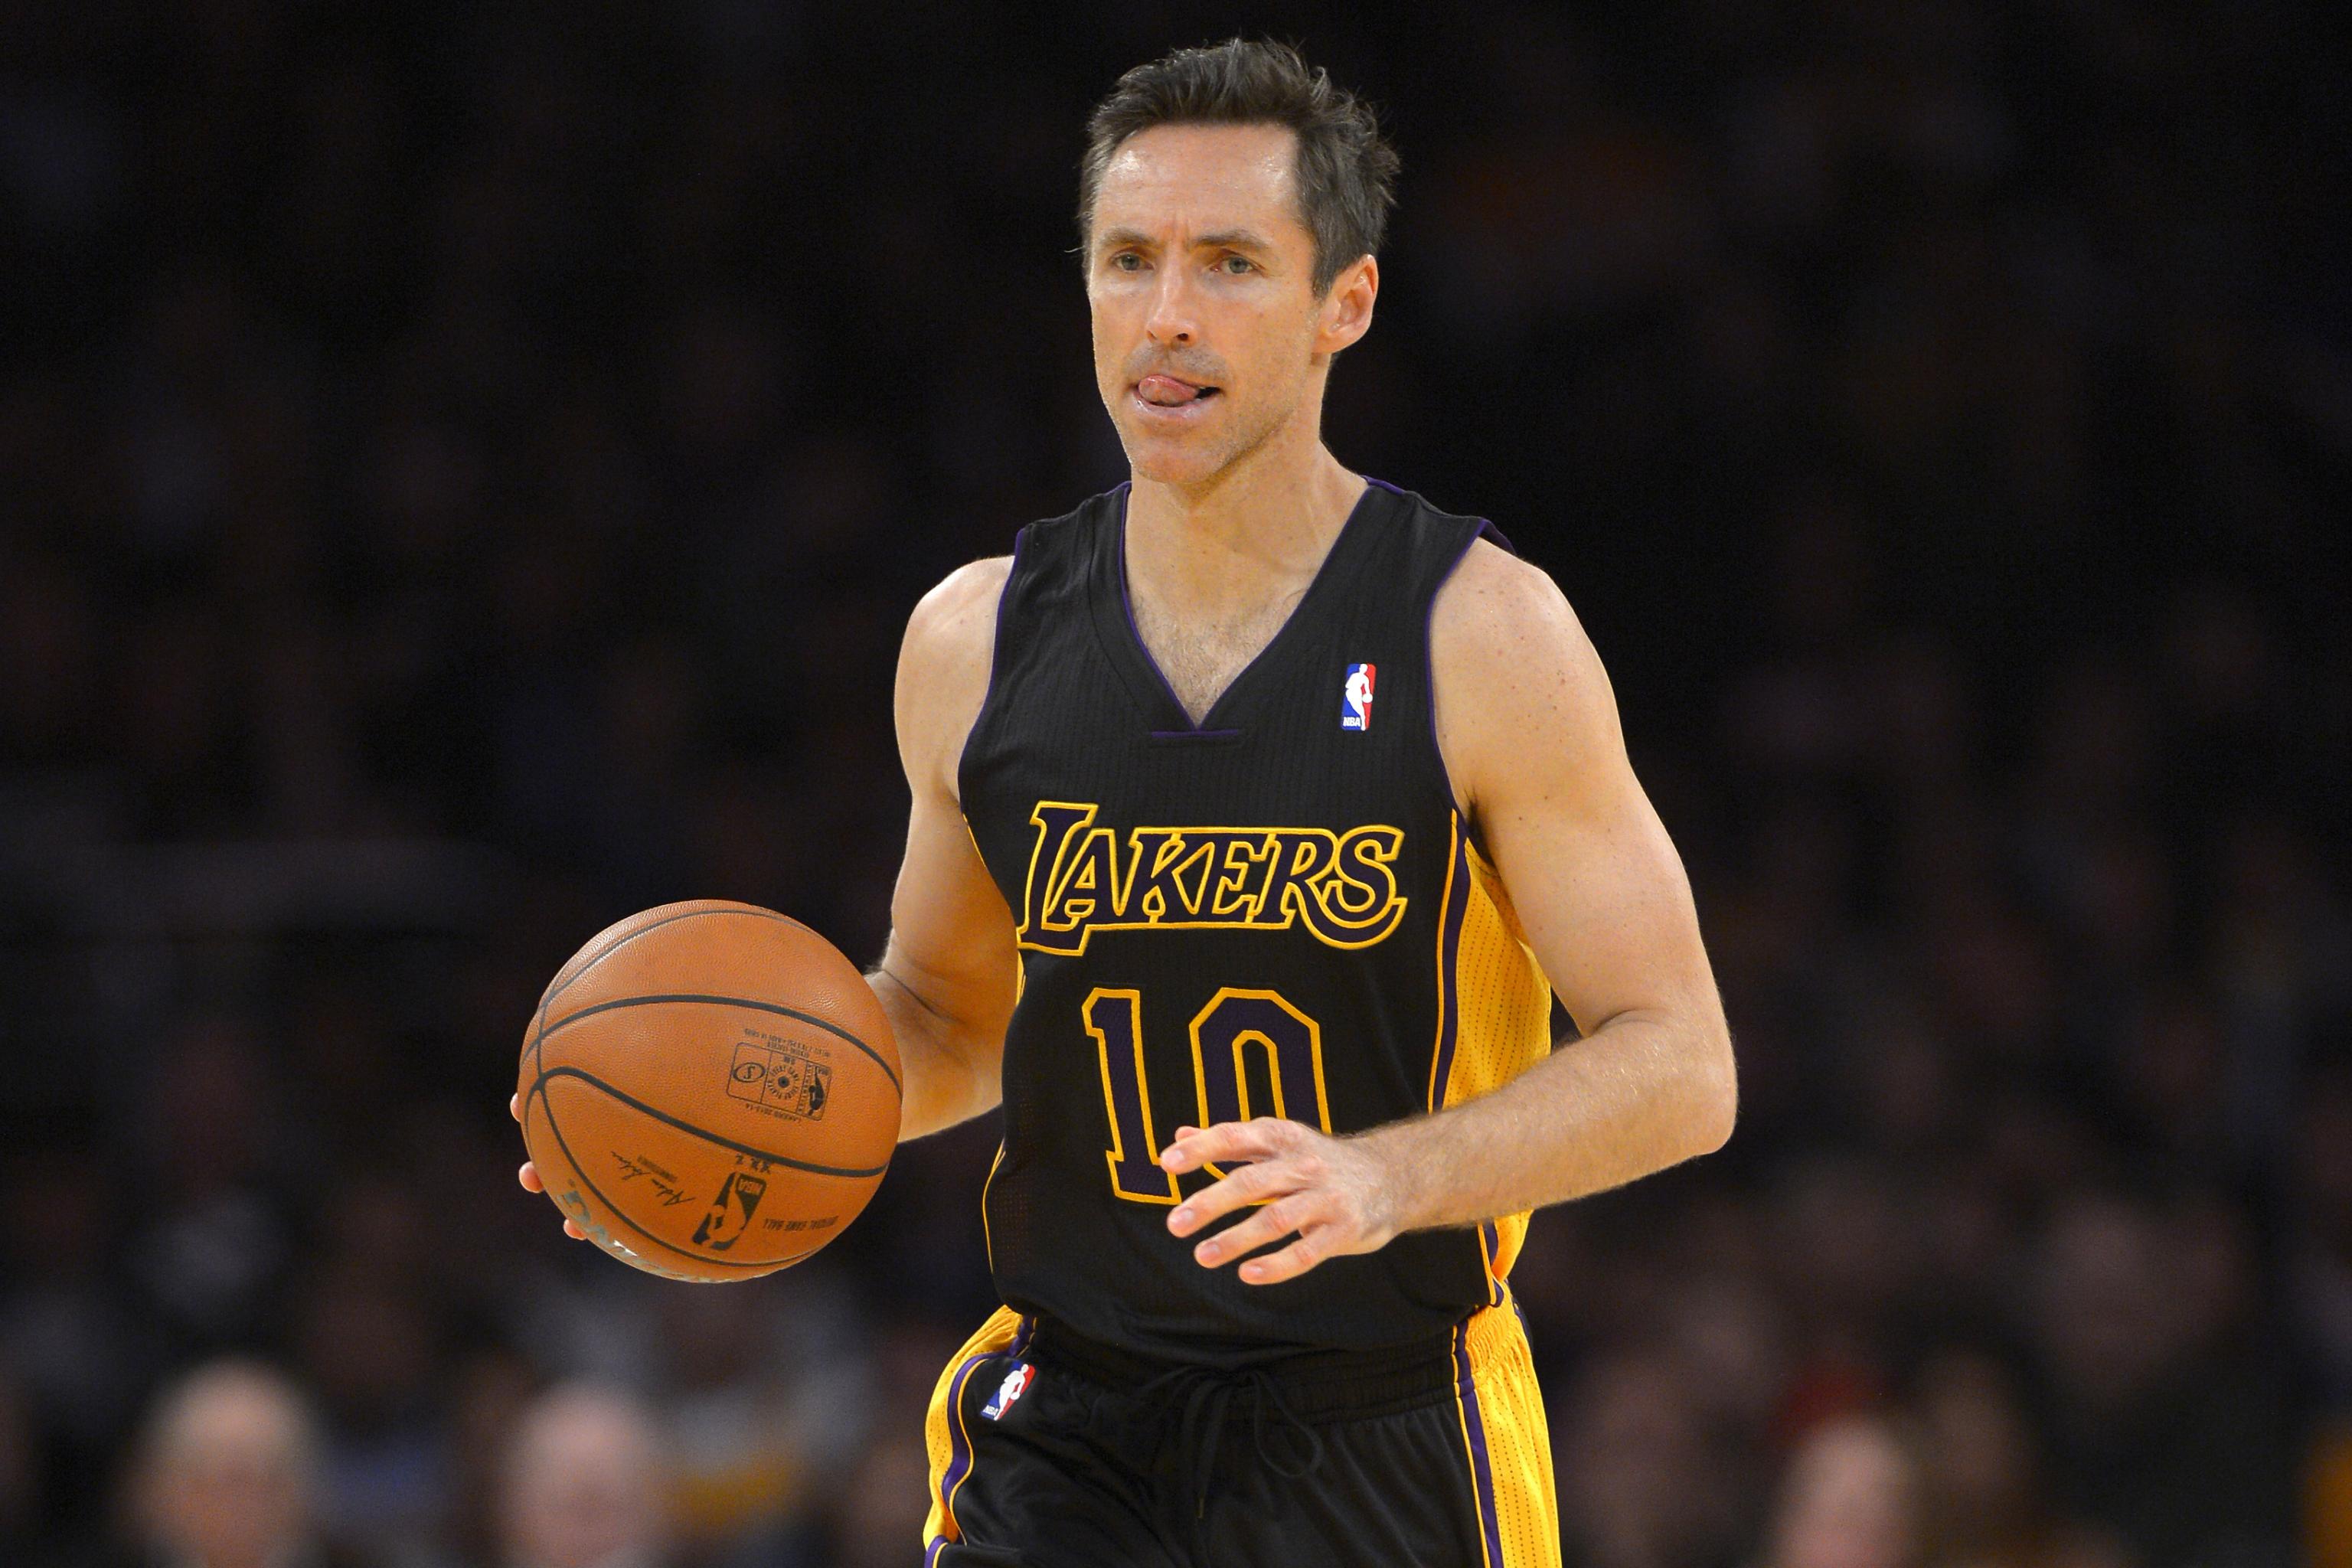 Steve Nash adjusting to new role on Lakers as he nears age 40